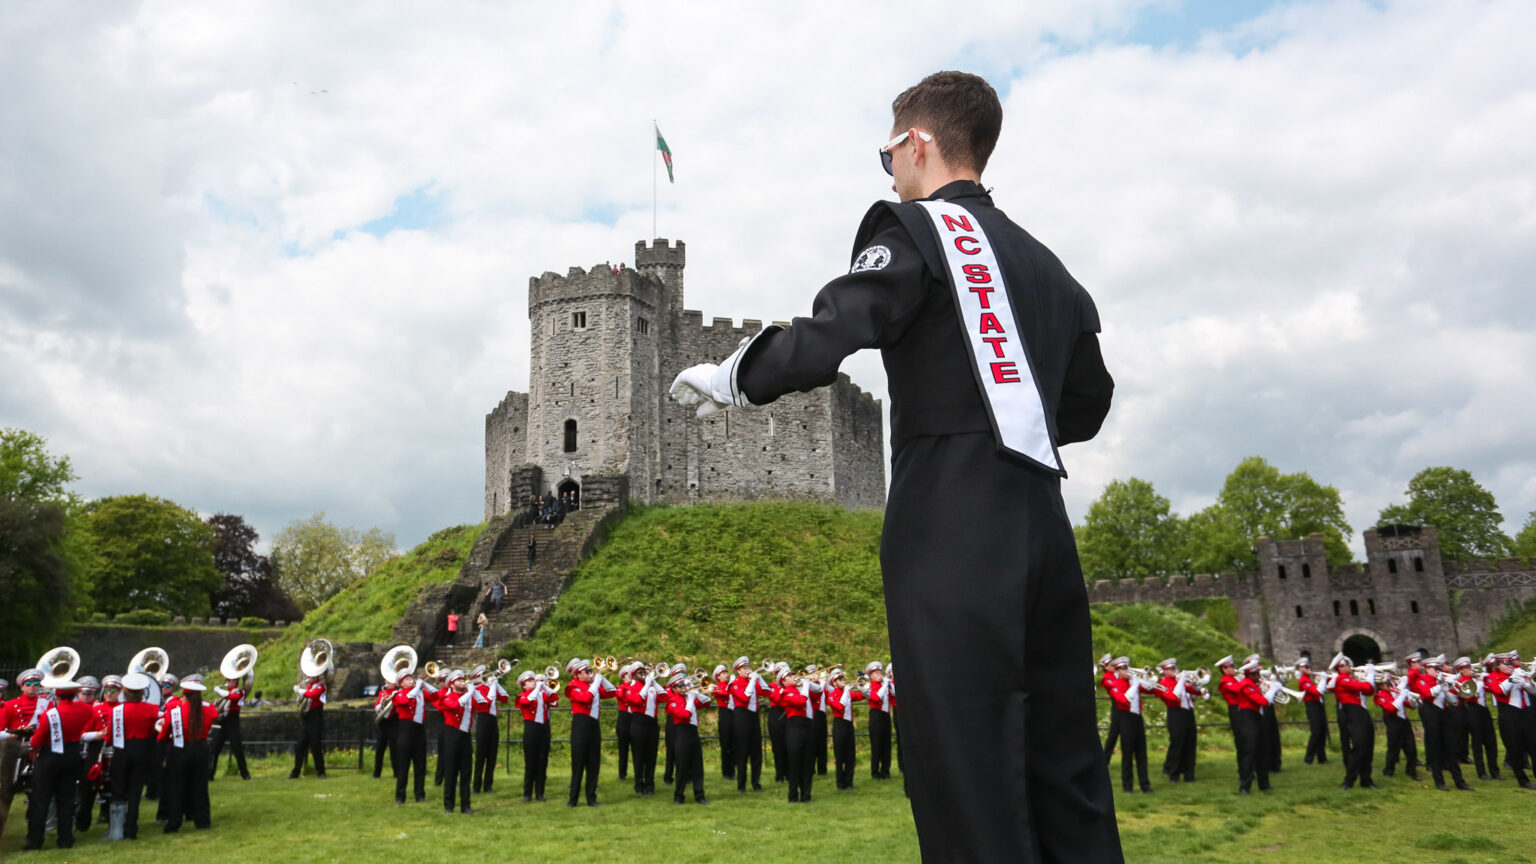 The Power Sound of the South® performs in front of Cardiff Castle in Wales, England—photo courtesy of Dan Jahn.